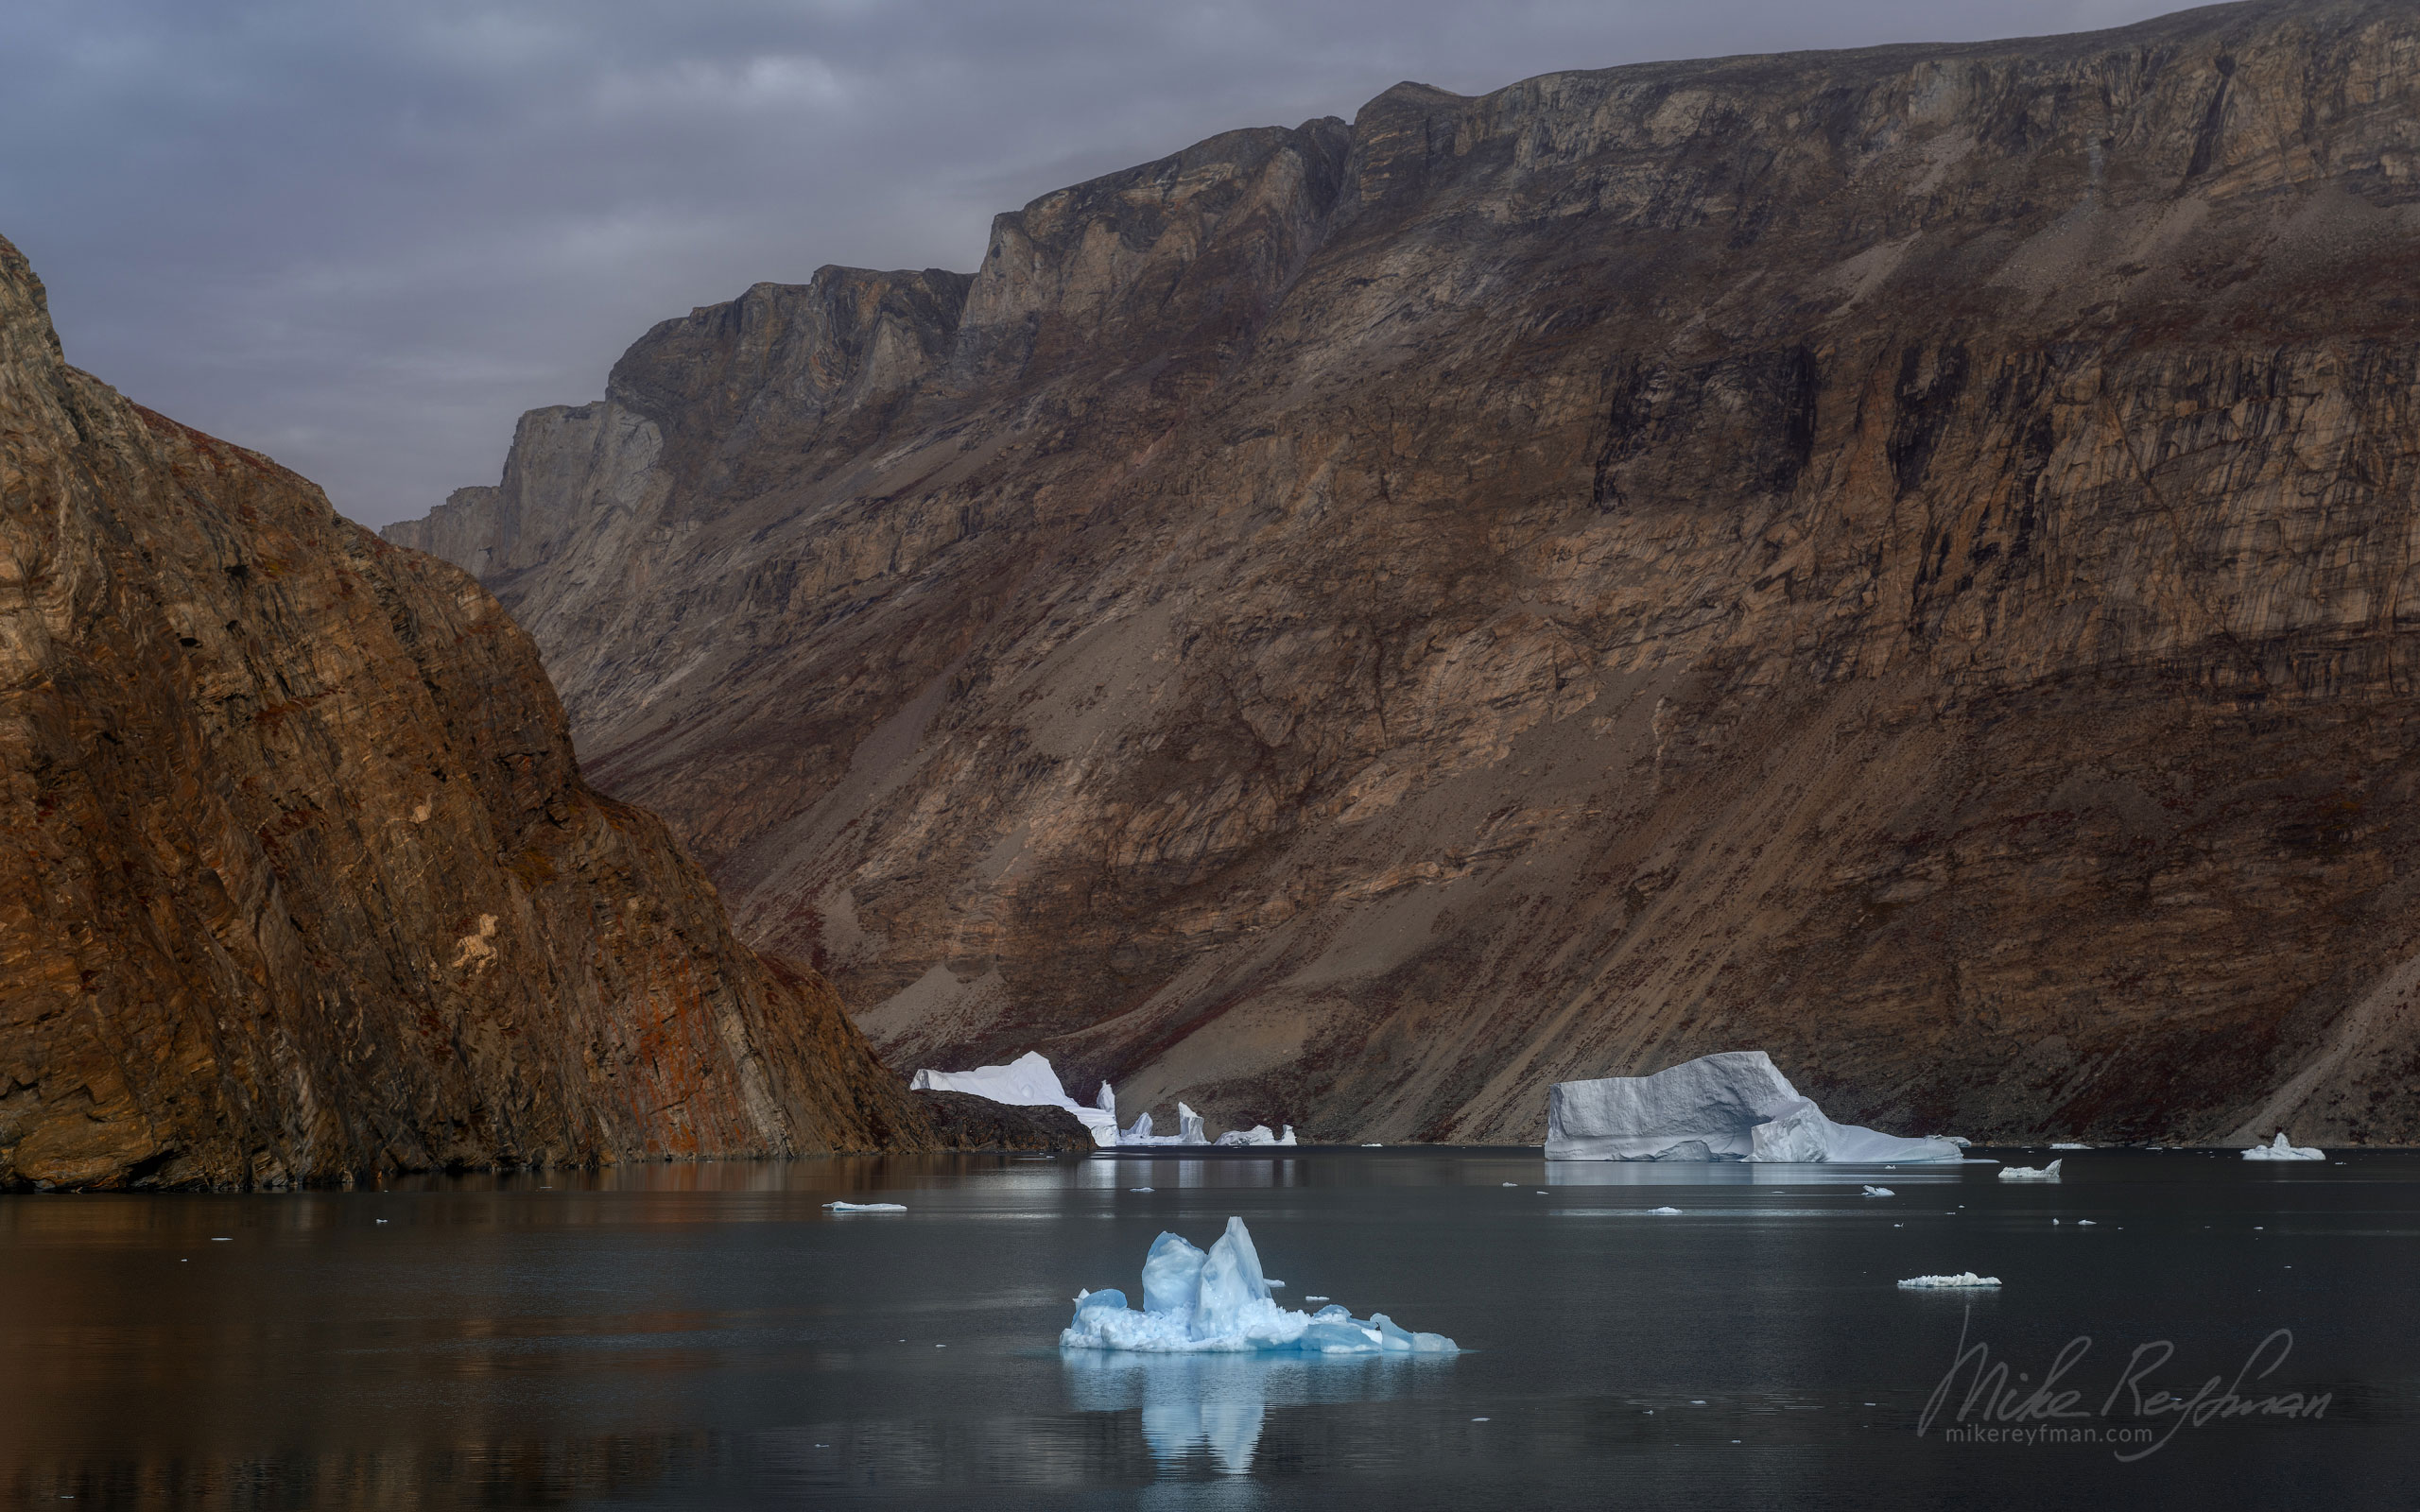 Scoresby Sund. Greenland. 024-GR-SC_50B7164 - The Scoresby Sund fjord system and the settlement of Ittoqqortoormiit. East Greenland. - Mike Reyfman Photography